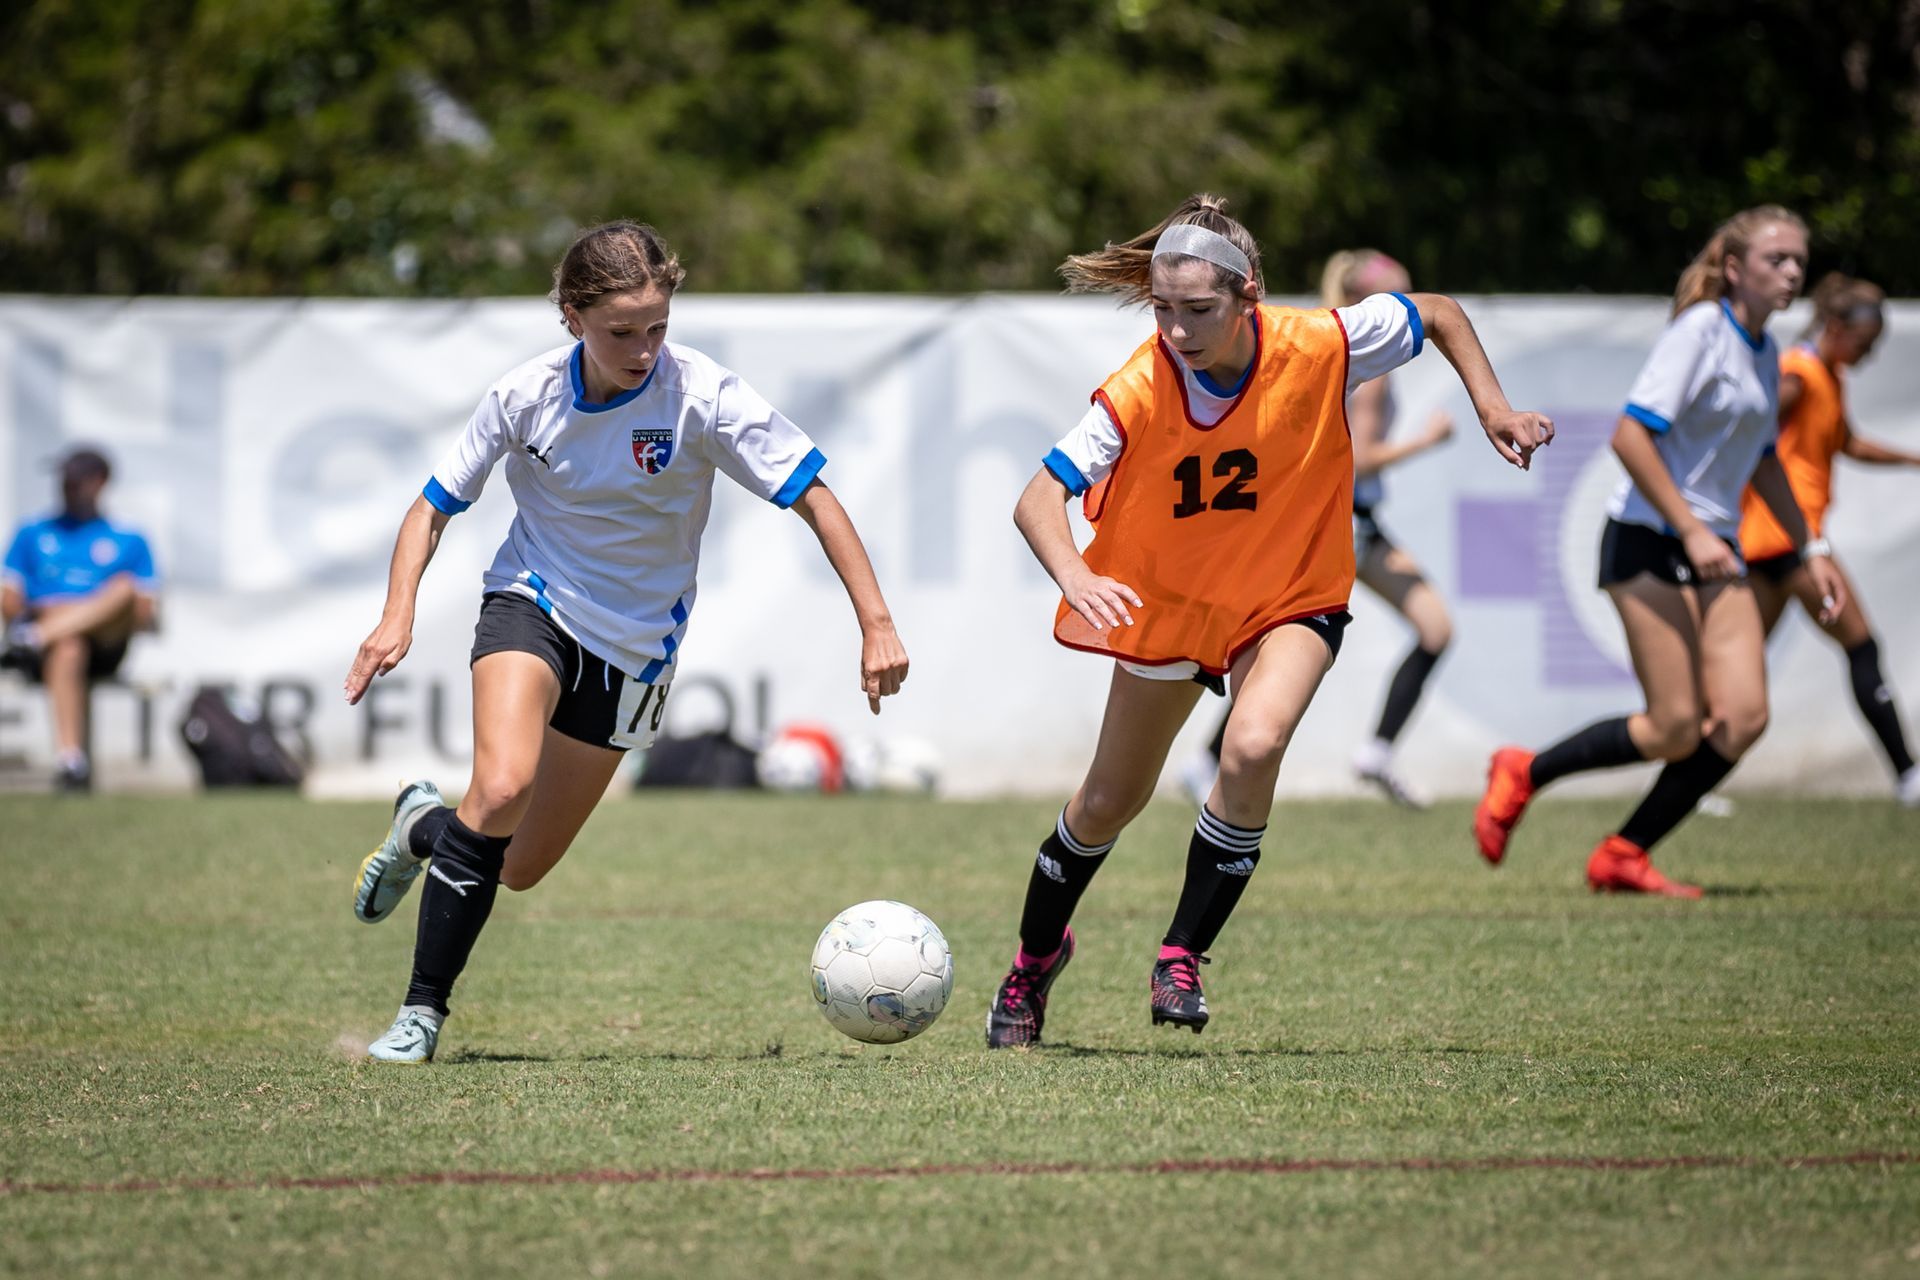 A group of young girls are playing soccer on a field for South Carolina United FC.